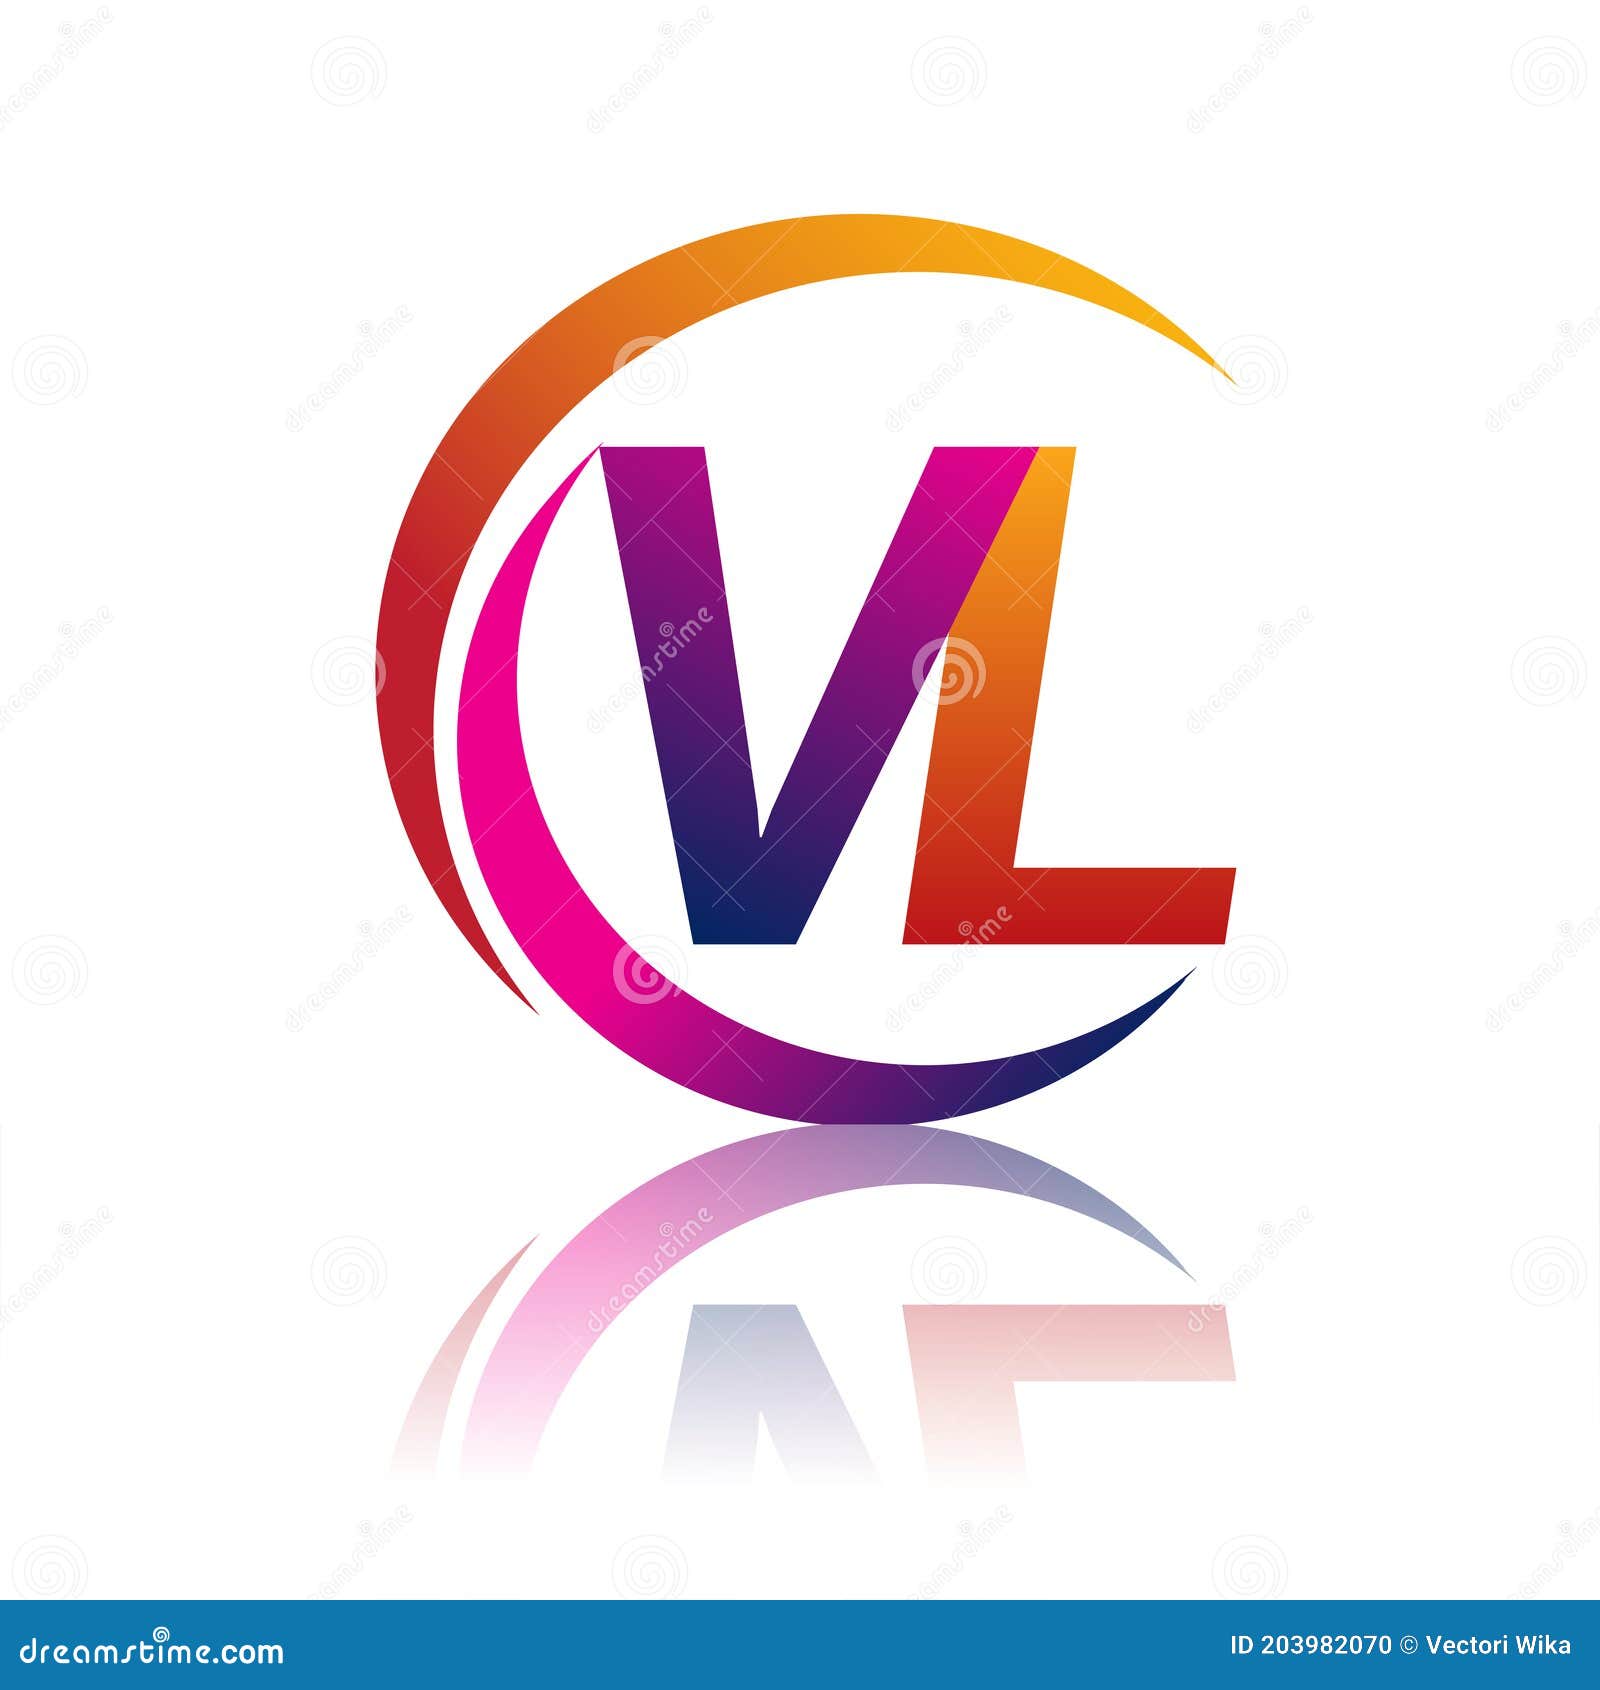 Initial Letter Logo VL Company Name Green And Orange Color On